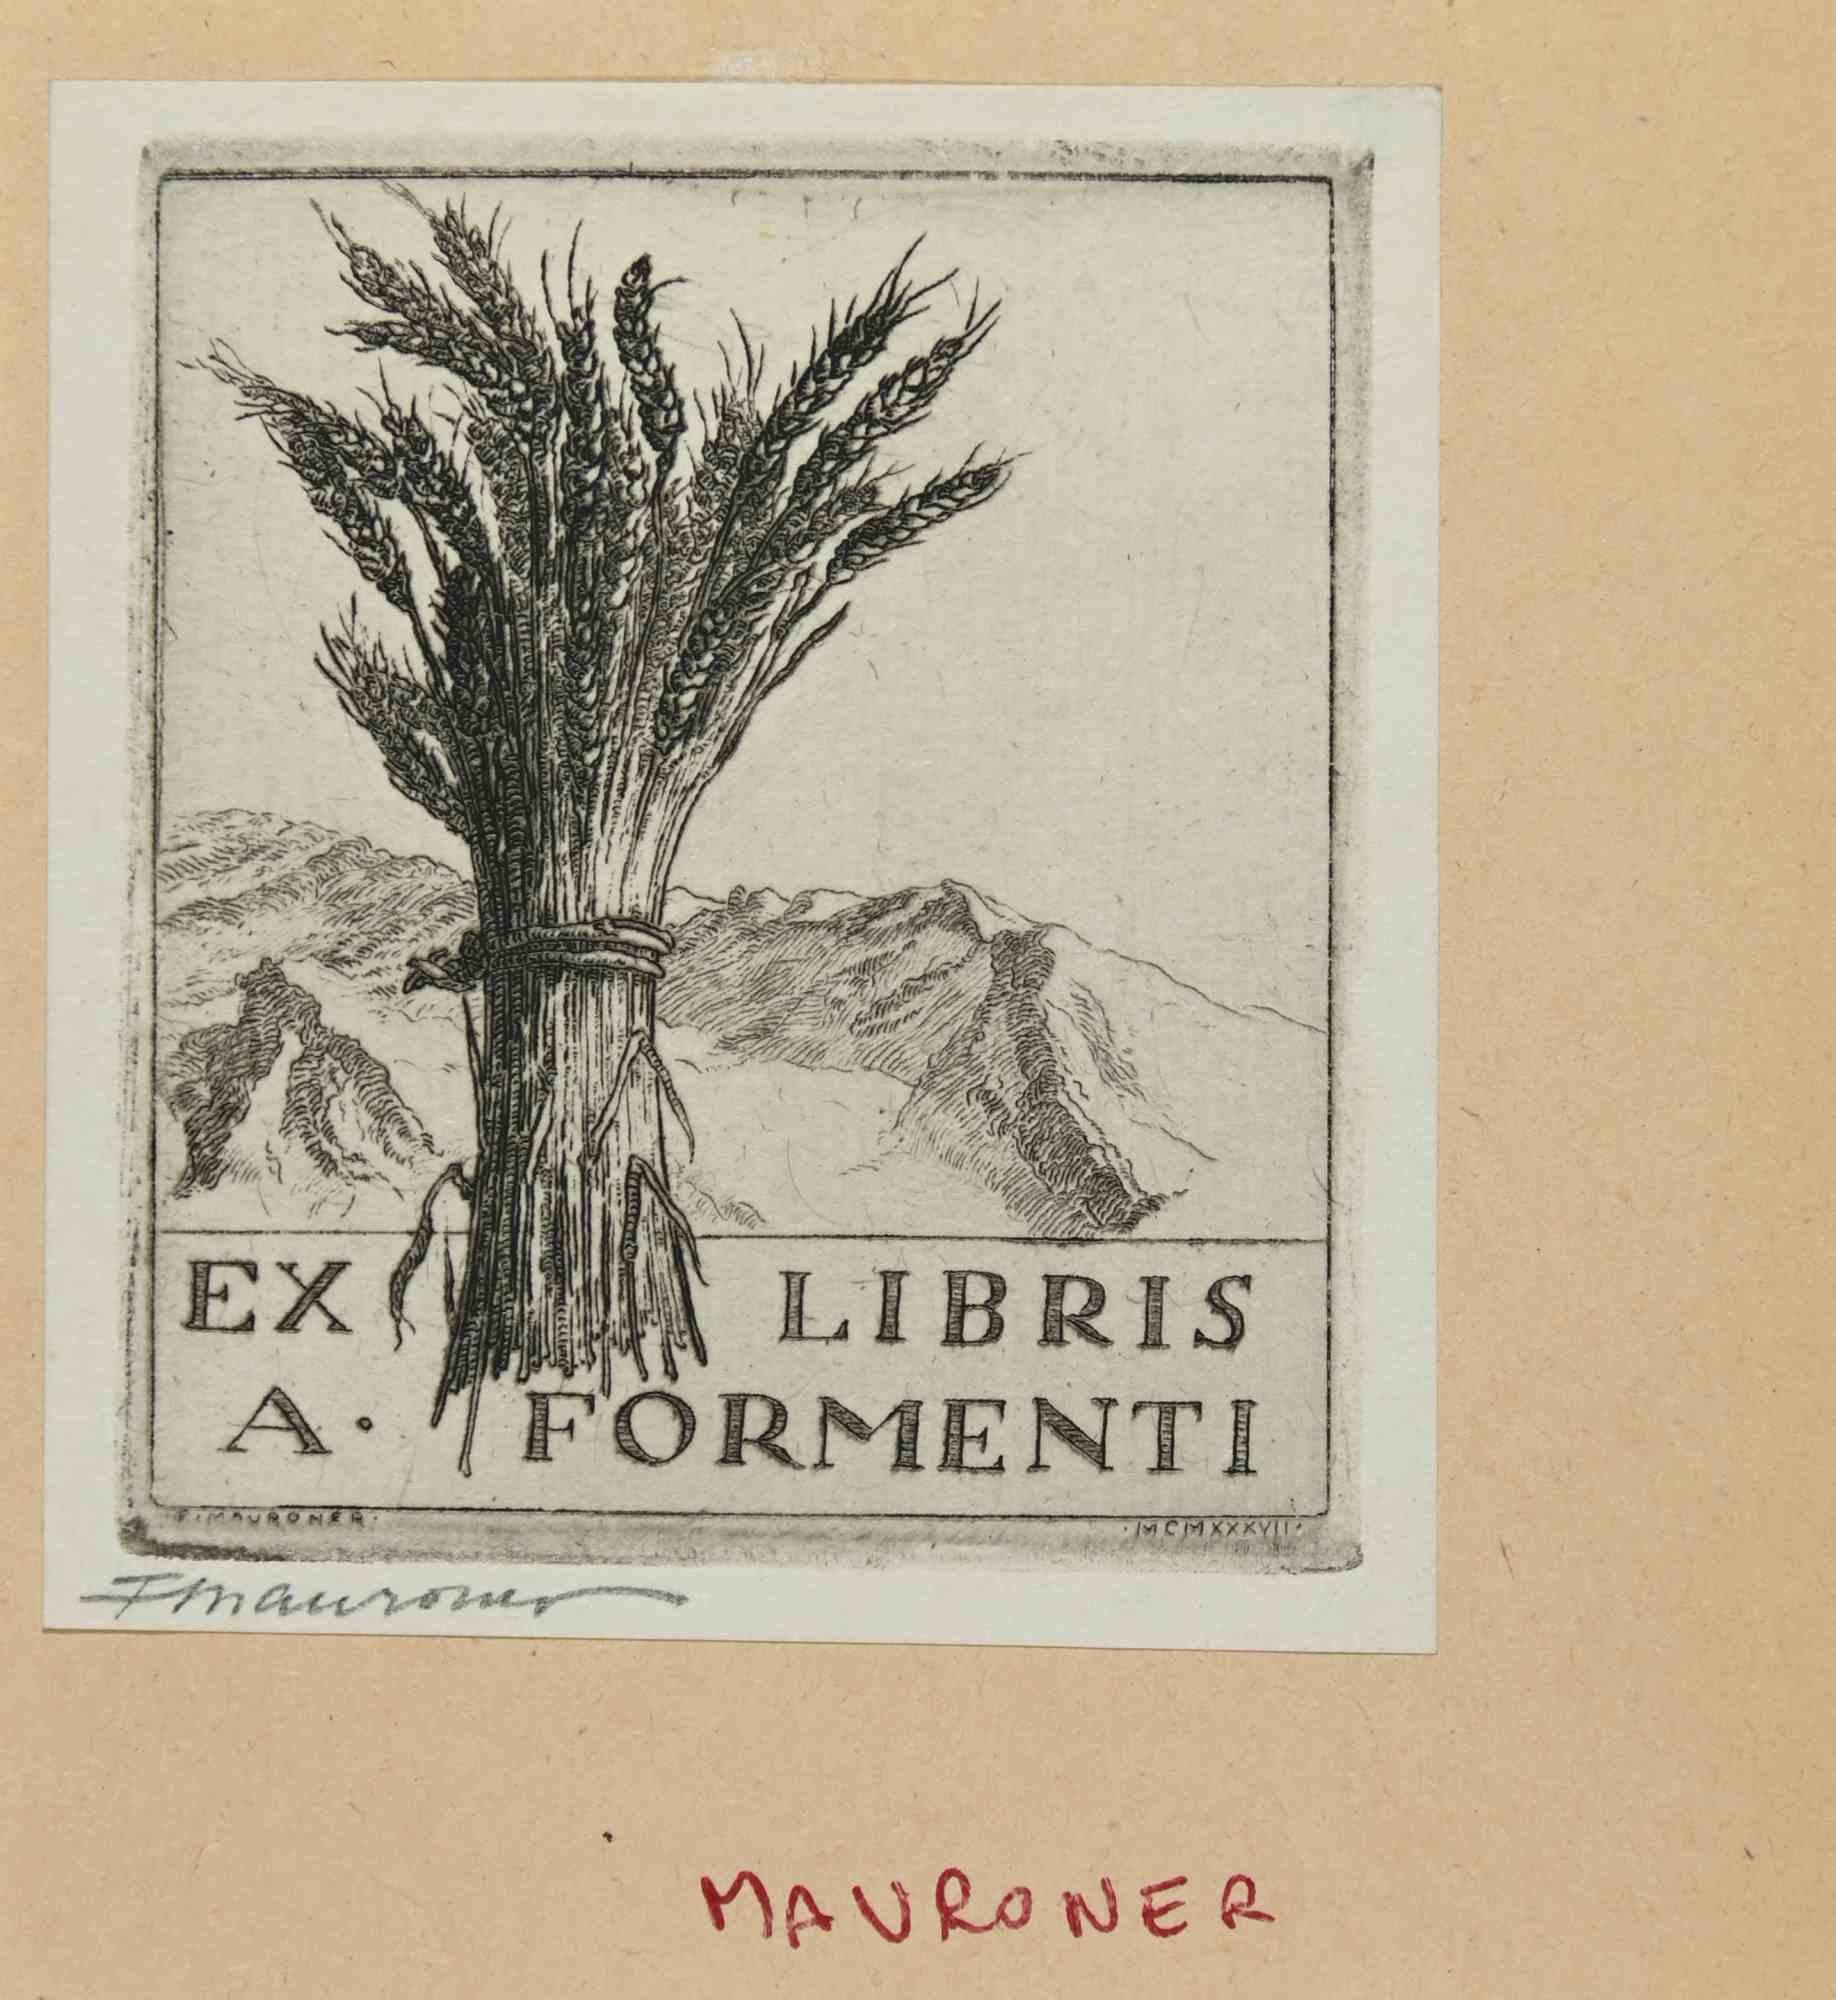 Ex Libris -A. Formenti is an Artwork realized in 1937,  by the Italian Artist Fabio Mauroner (1884-1947)

Etching print on ivory paper. Hand Signed on the left margin and dated "MCMXXXVII", on the right corner.

The work is glued on colored